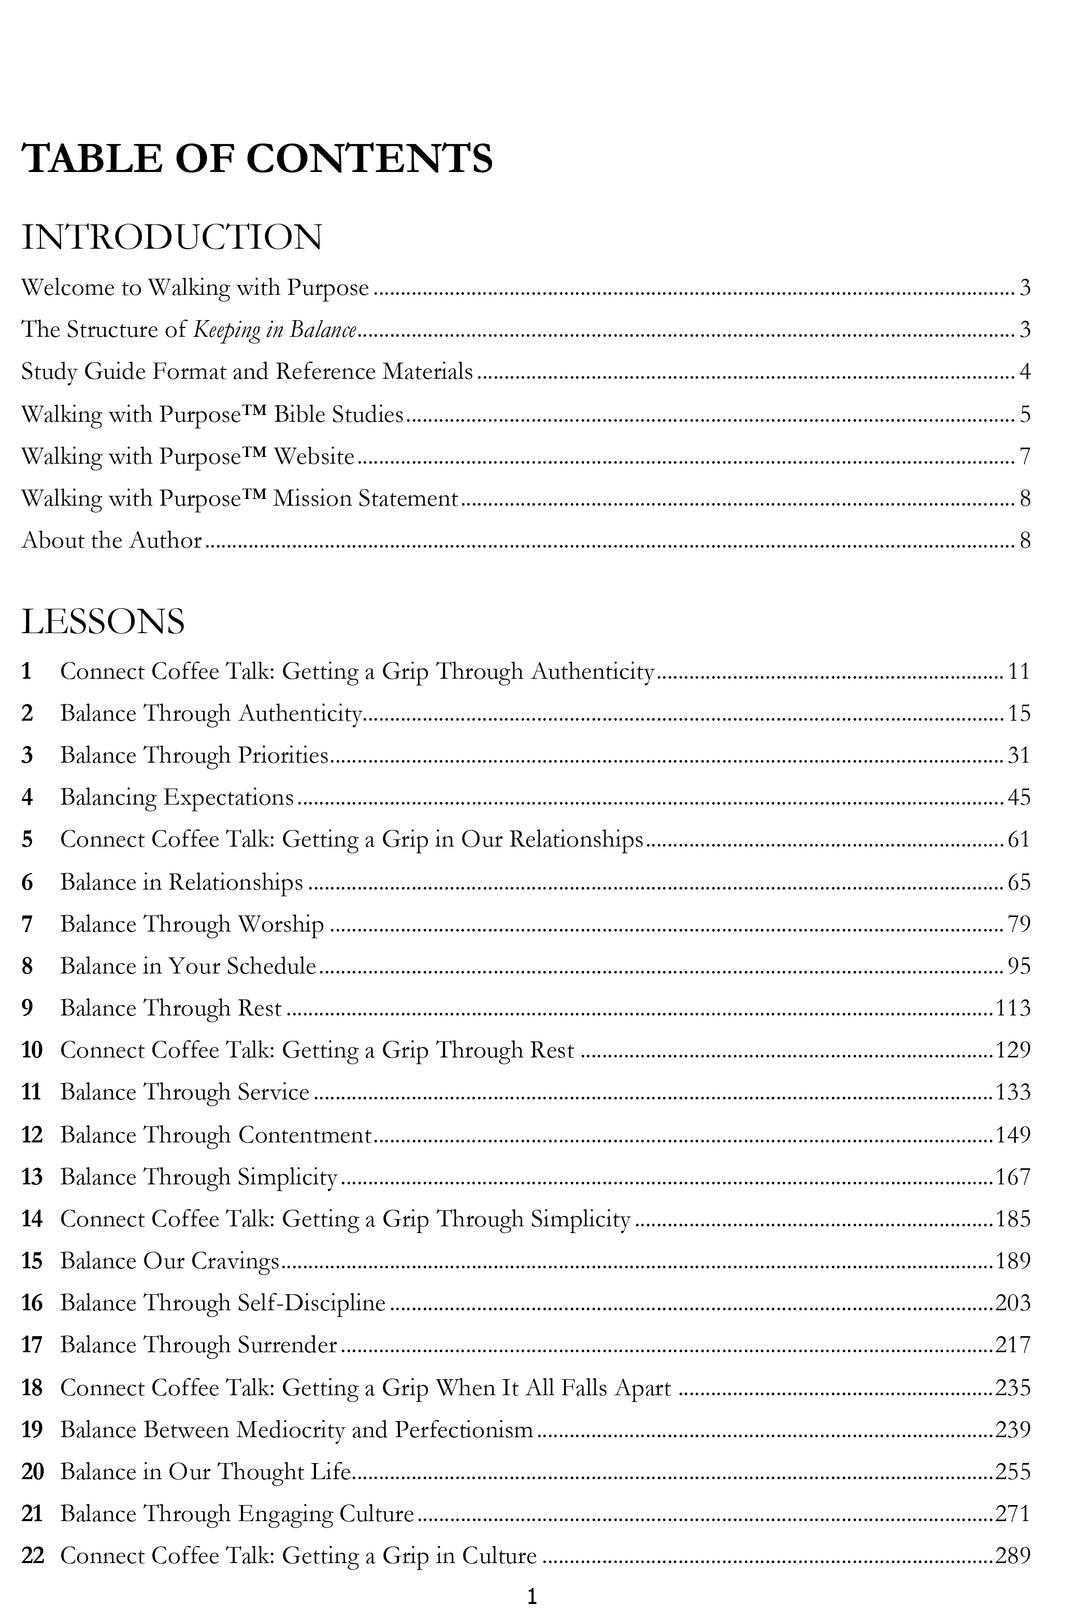 Keeping in Balance Table of Contents